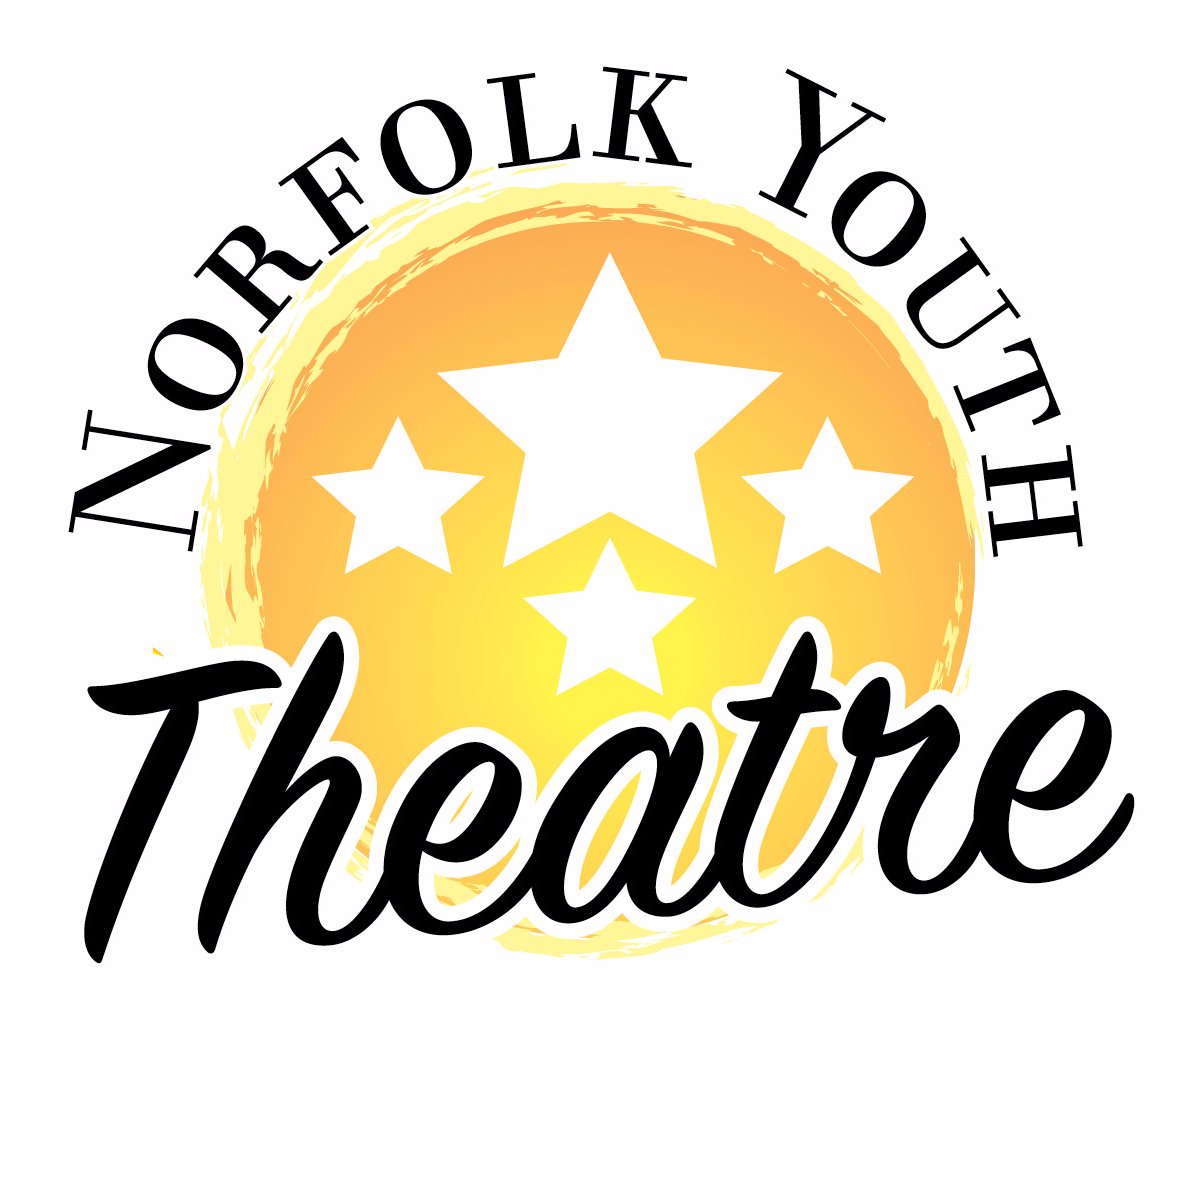 Nfk Youth Theatre Profile